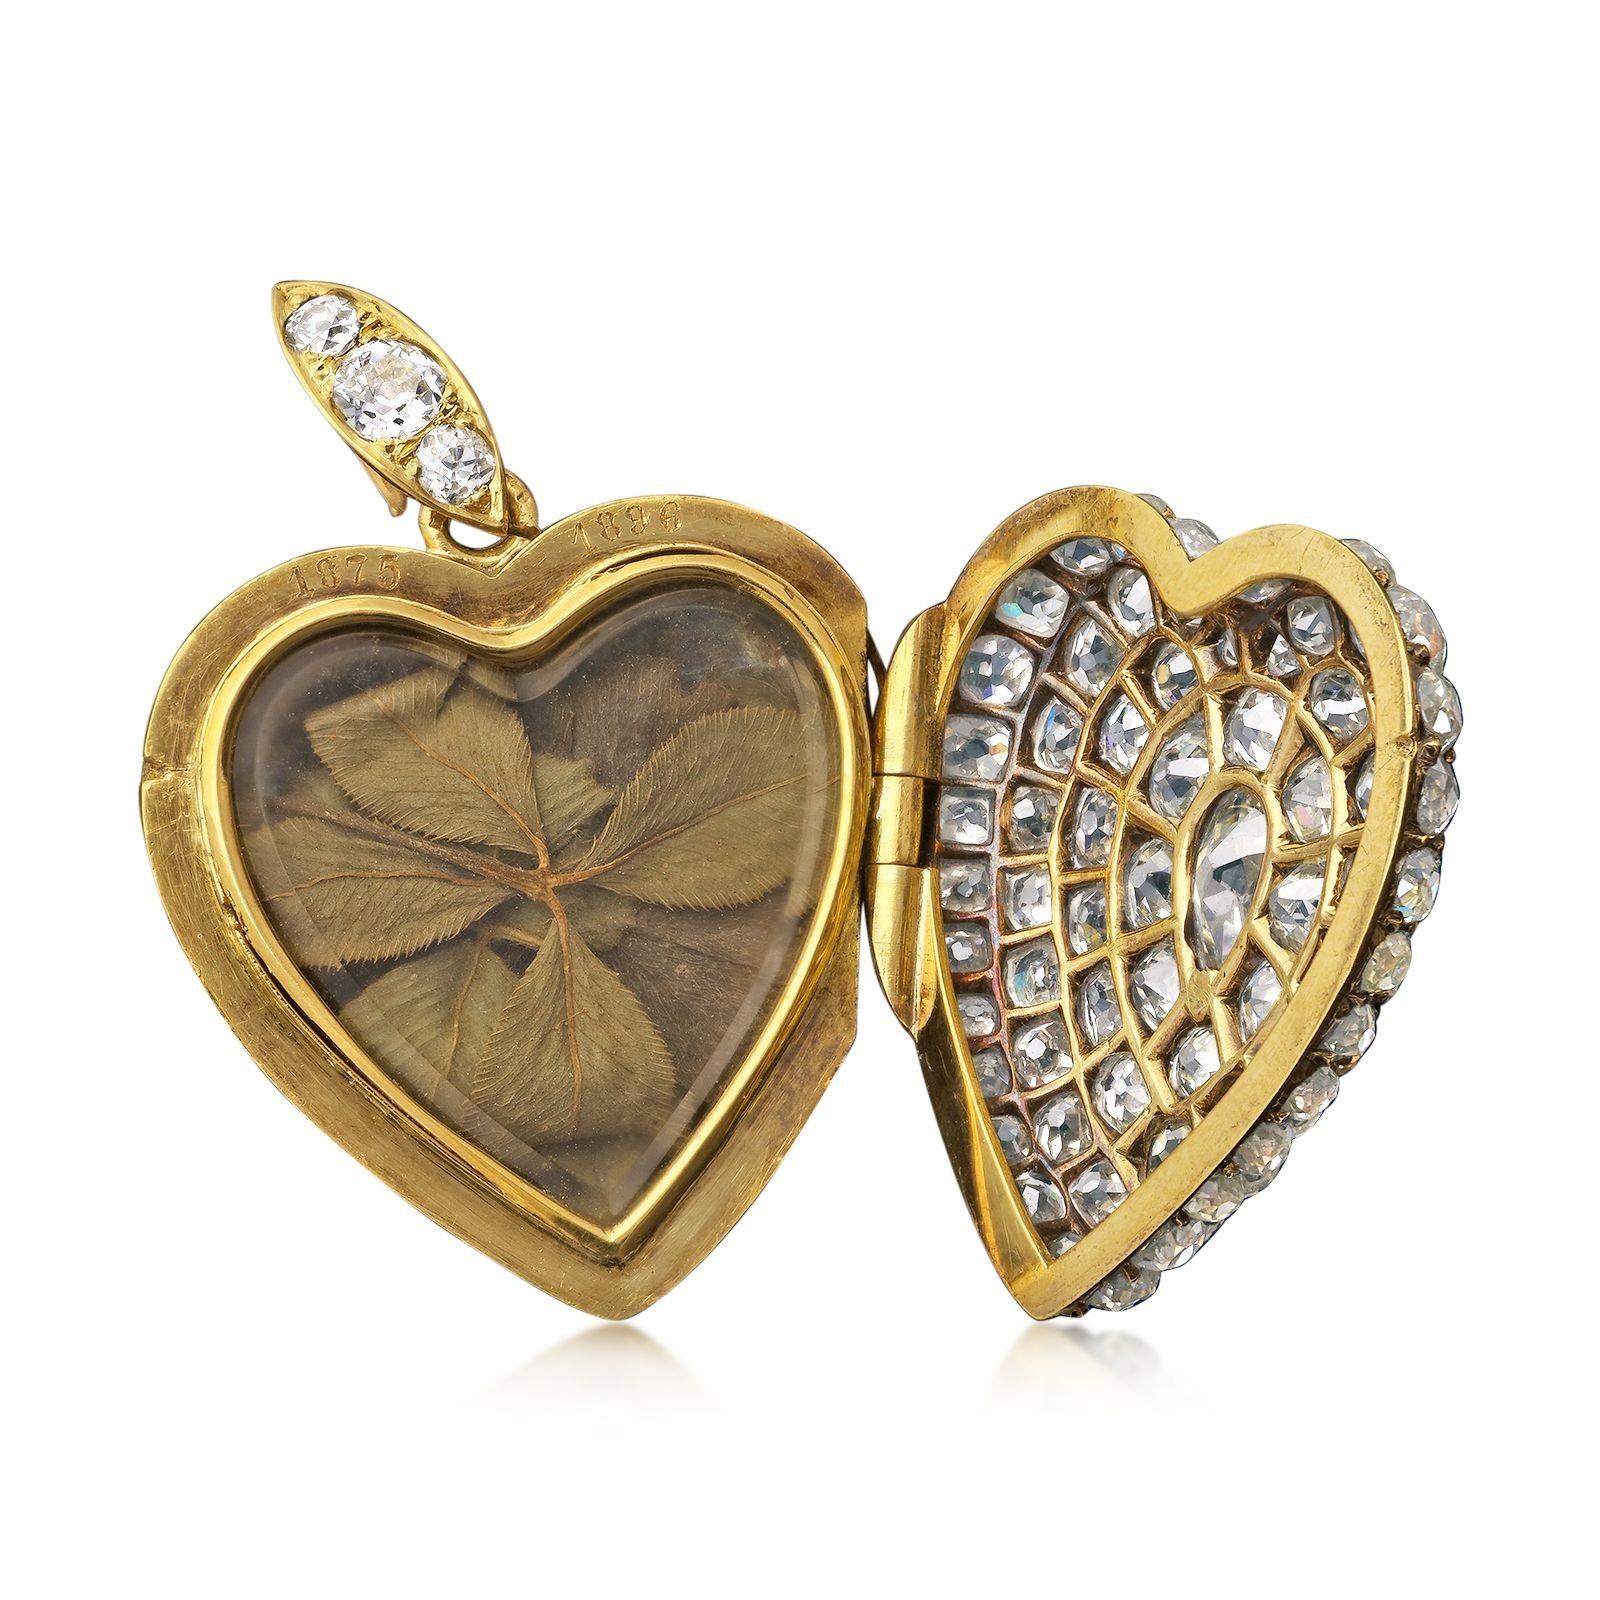 A stunning late Victorian diamond heart shaped pendant locket c.1896, the domed heart fully pavé set to the front with old mine cut diamonds and centred with a single pear shape, all in a pierced out silver setting backed with gold, the rounded back